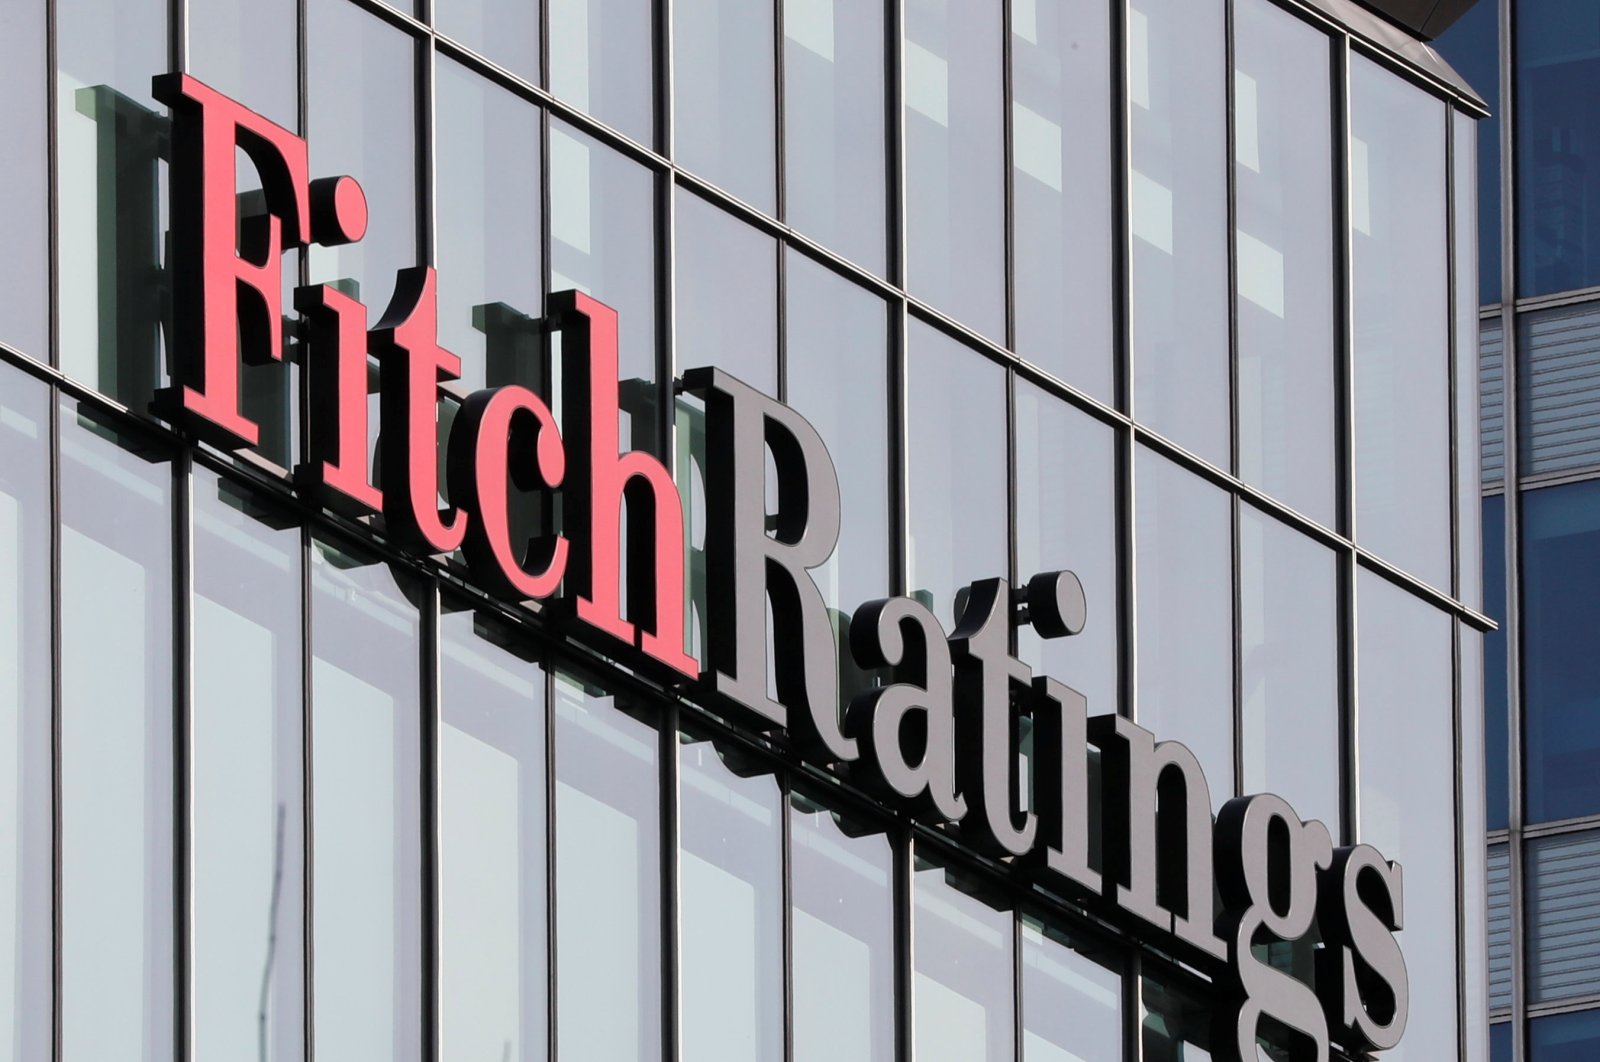 The Fitch Ratings logo is seen at their offices at Canary Wharf financial district in London, Britain, March 3, 2016. (Reuters Photo)